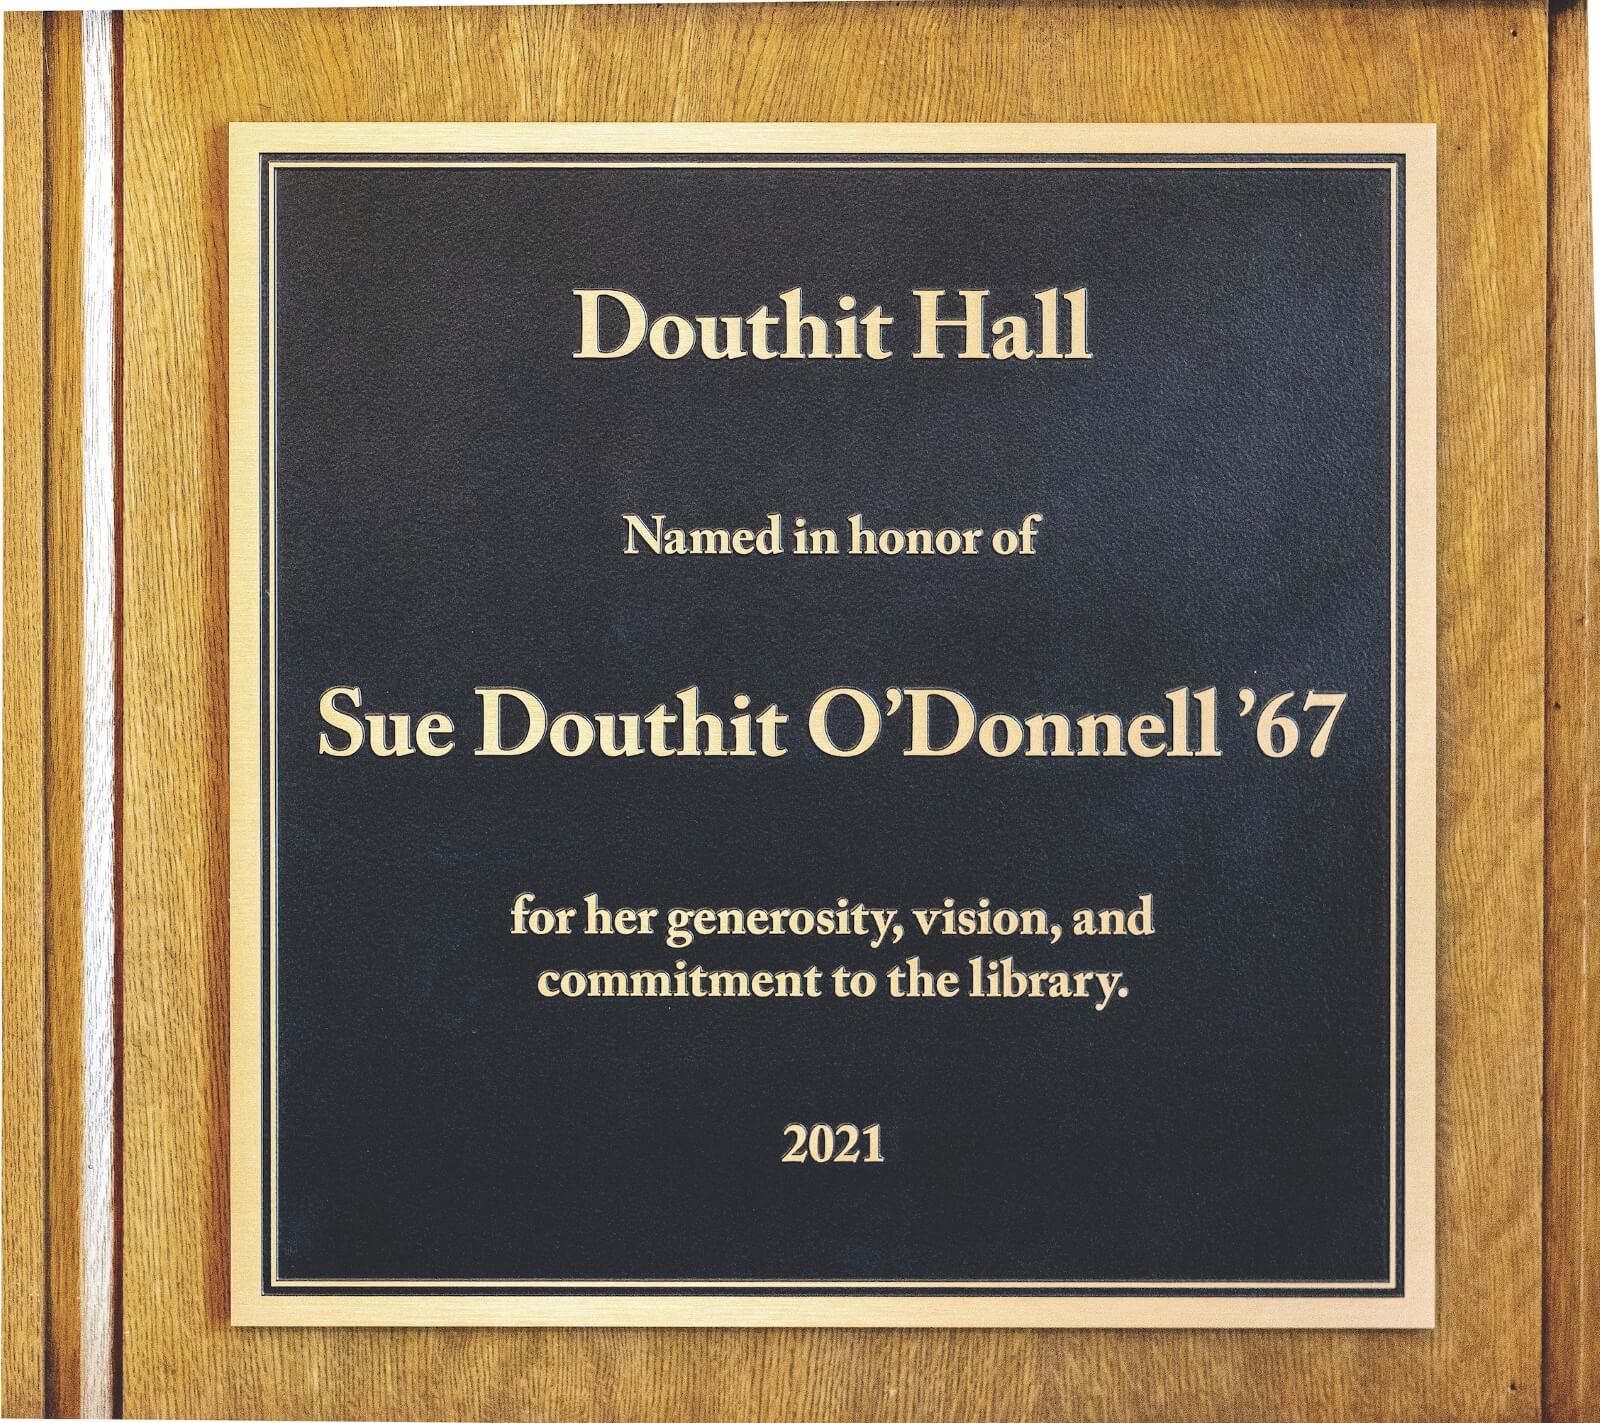 A plaque naming the original library building Douthit Hall has been placed just inside the main entrance.